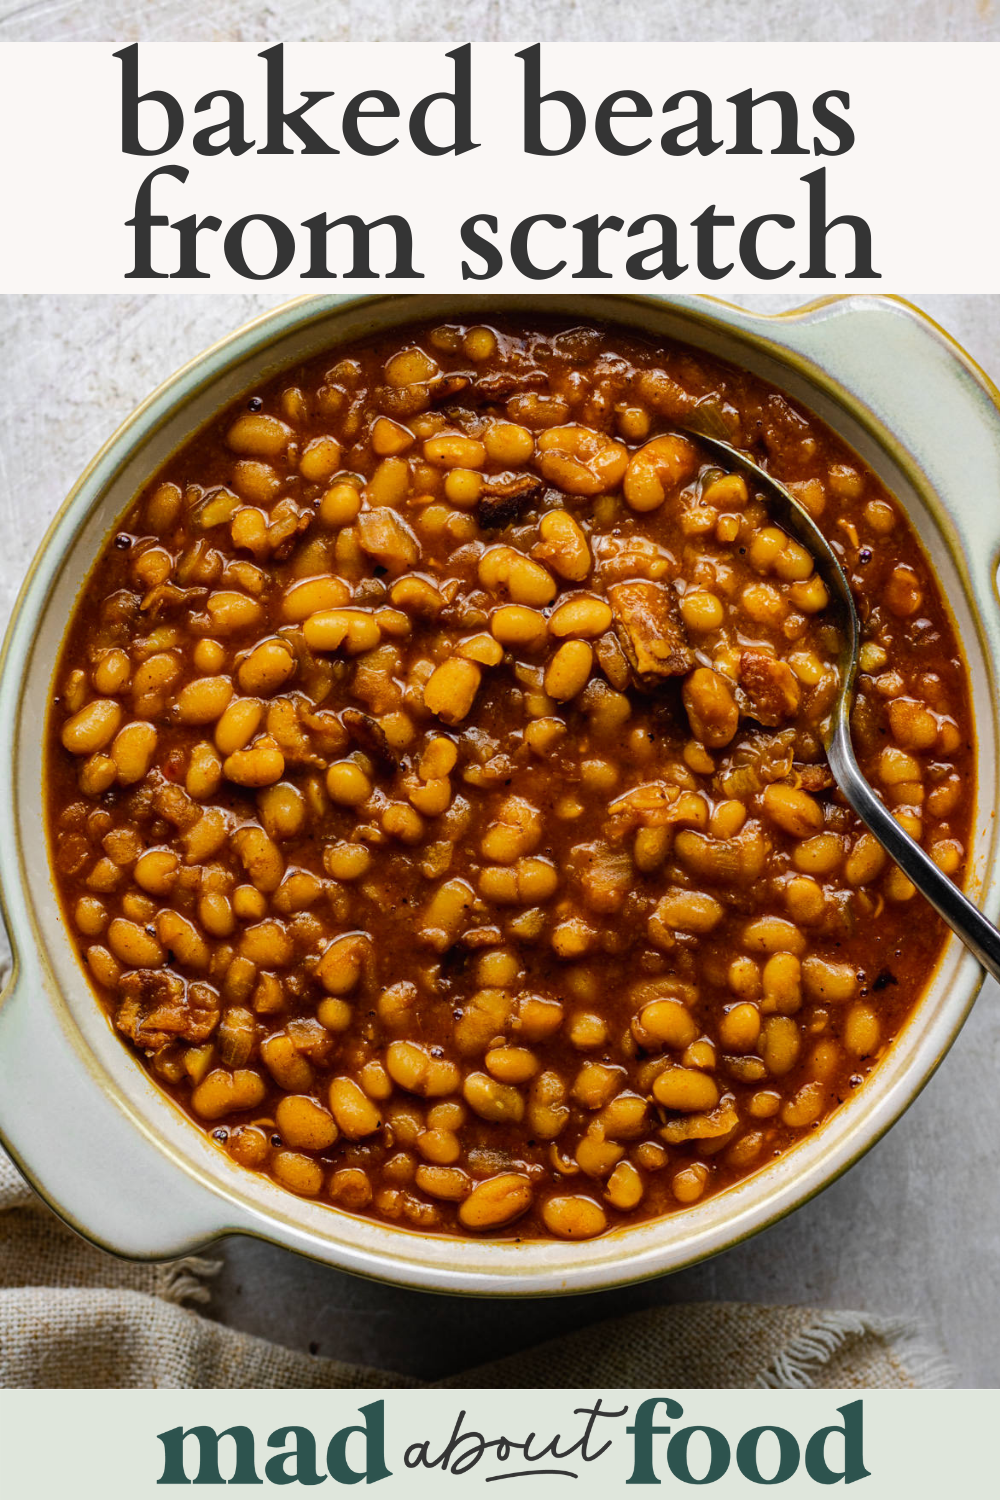 Image for pinning Baked Beans from Scratch recipe on Pinterest